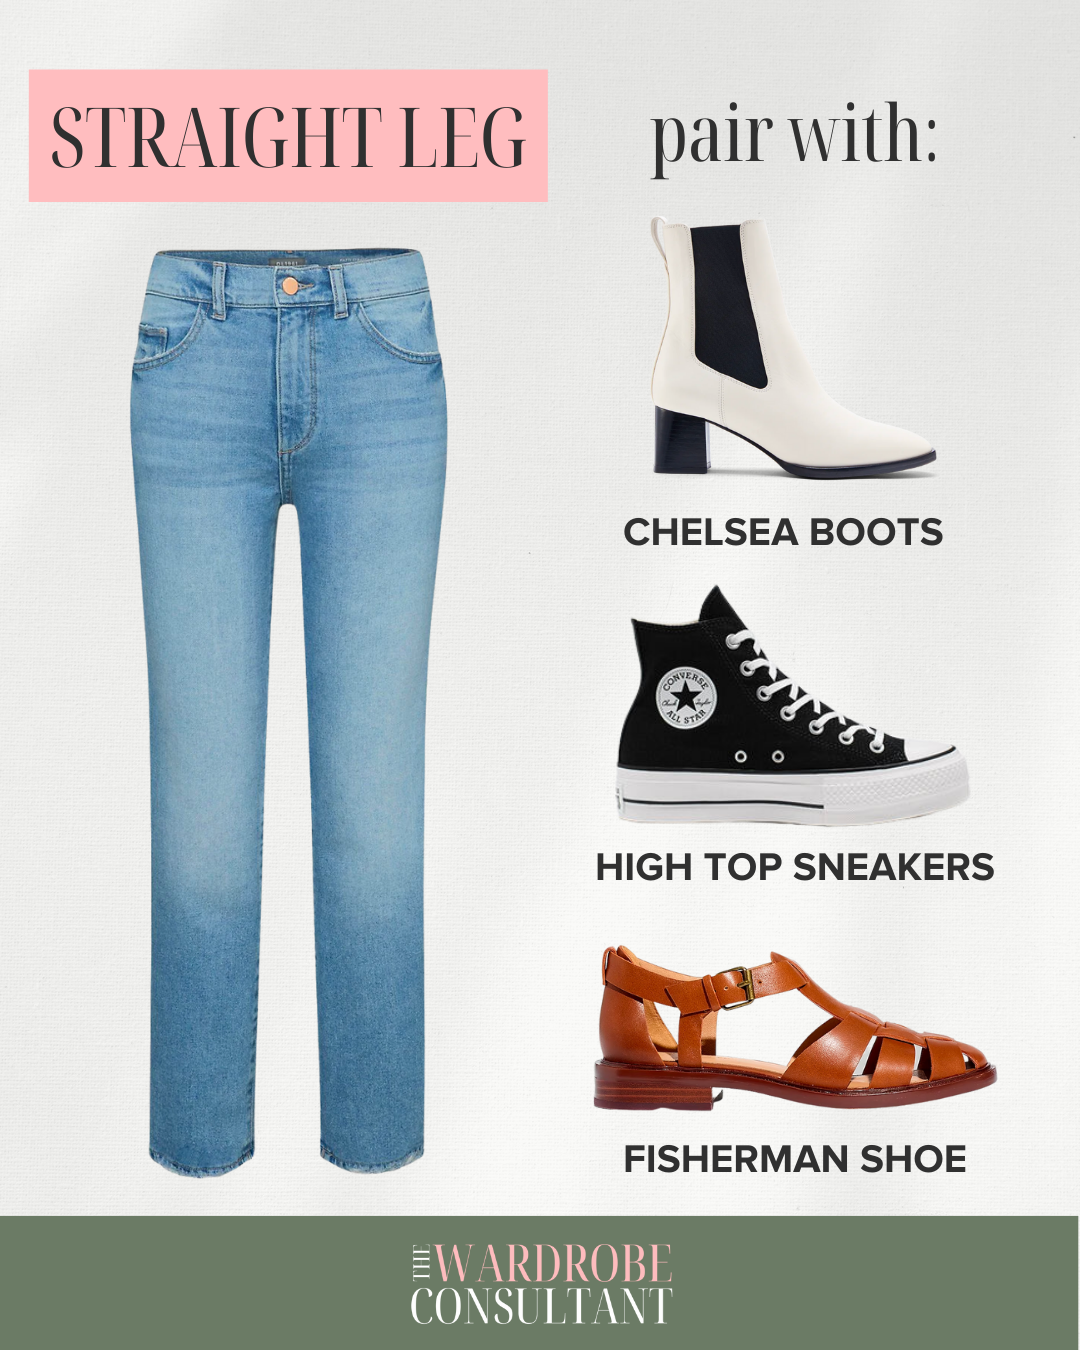 10 Best Shoes to Wear with Bootcut Jeans + Look Modern - Be So You  Bootcut  jeans outfit, Womens jeans bootcut, Shoes to wear with bootcut jeans